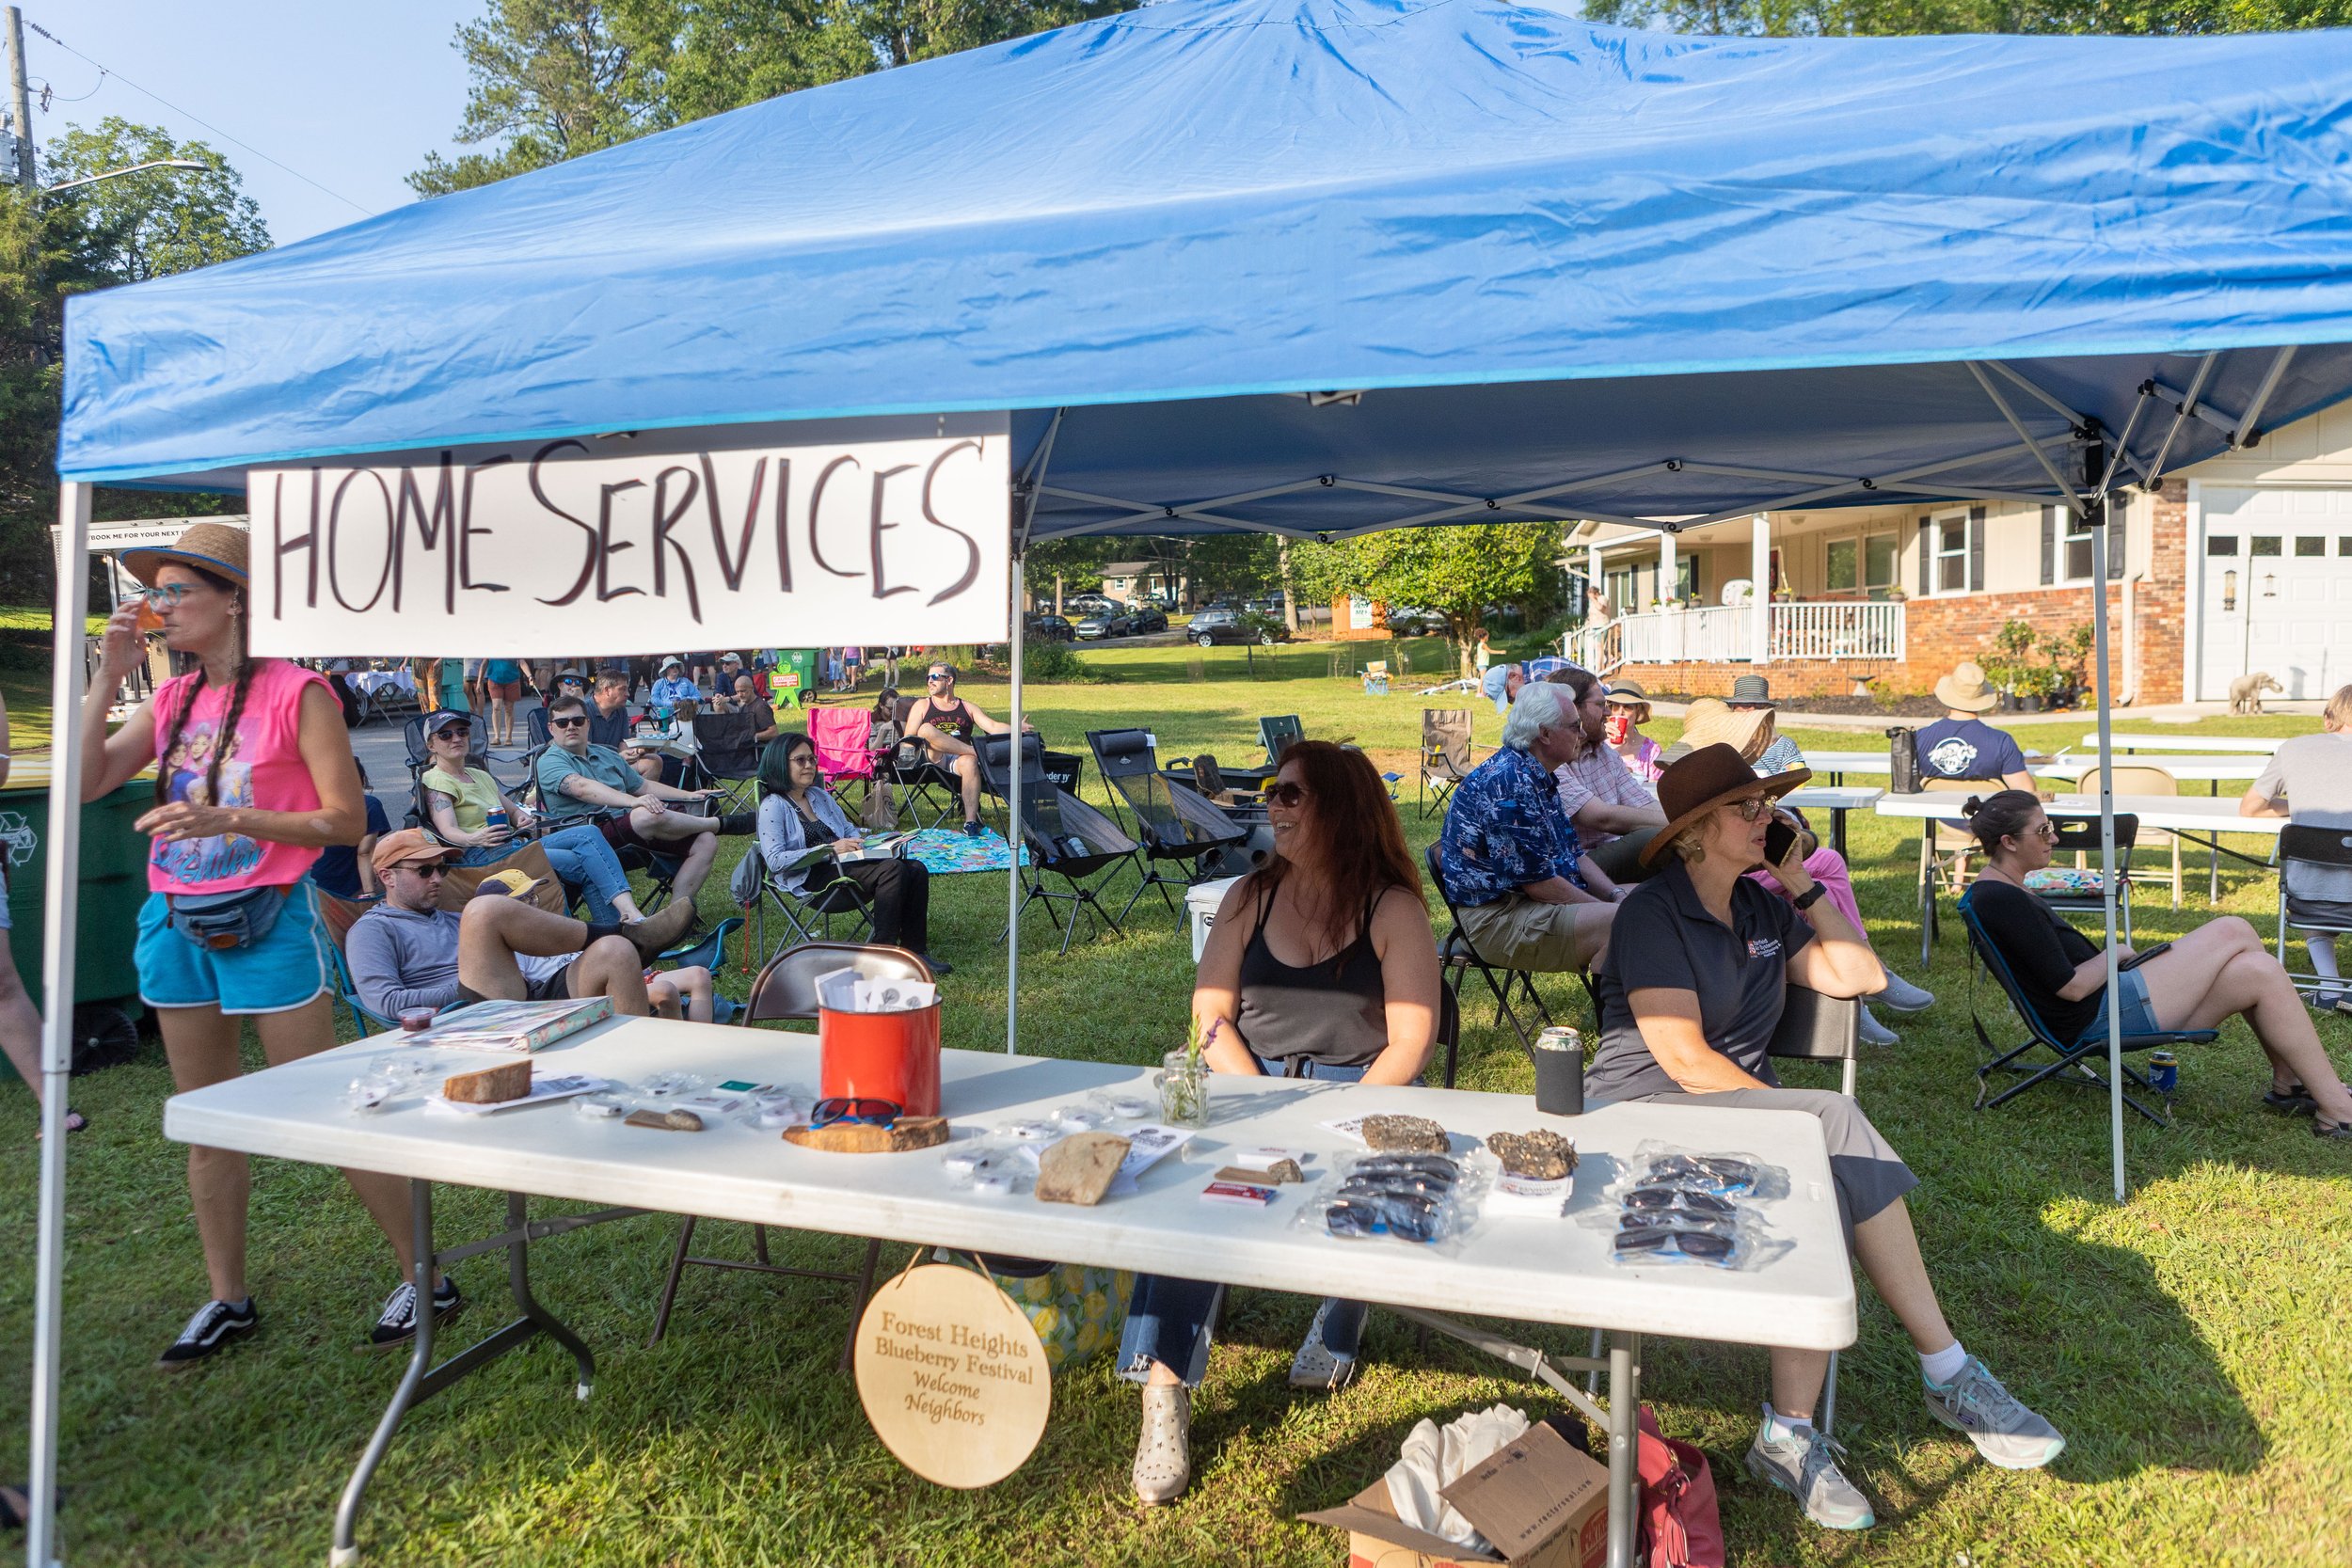  Sponsor tent for recommended home service vendors.   Photo: Sabrena Deal 